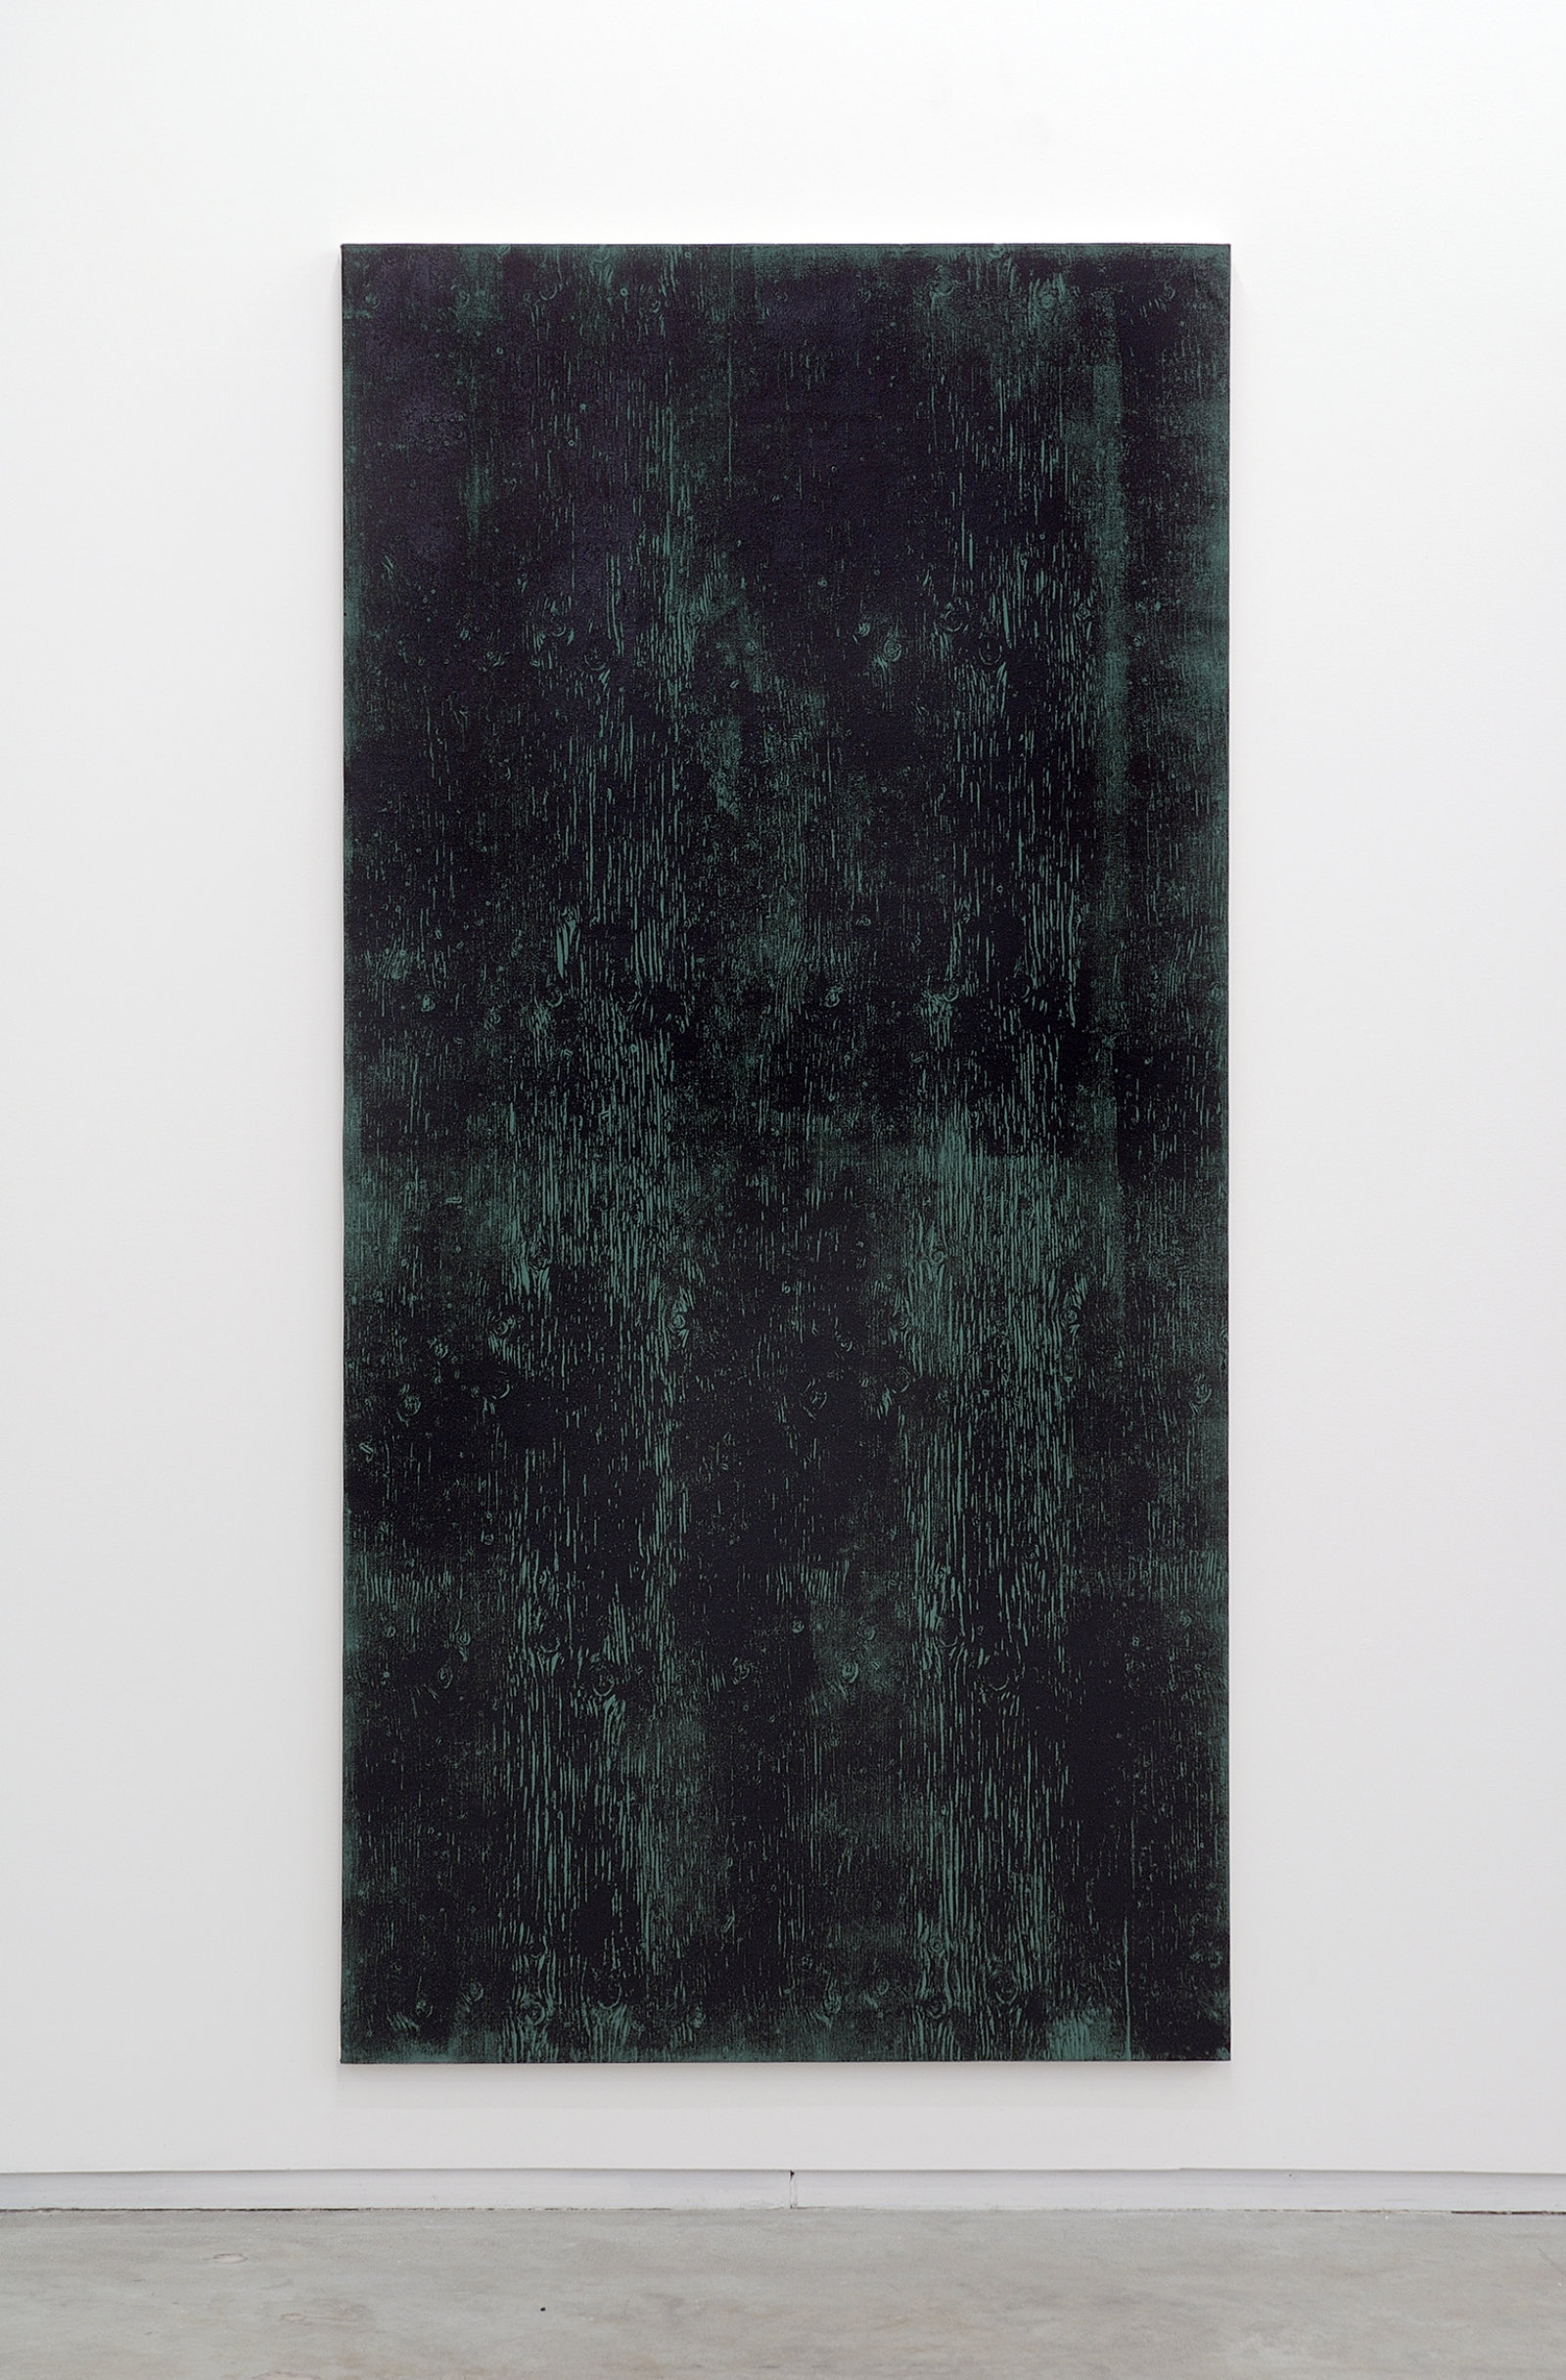 Ian Wallace, Untitled (Monoprint with Green), 1990, acrylic on canvas, 90 x 20 in. (229 x 51 cm)